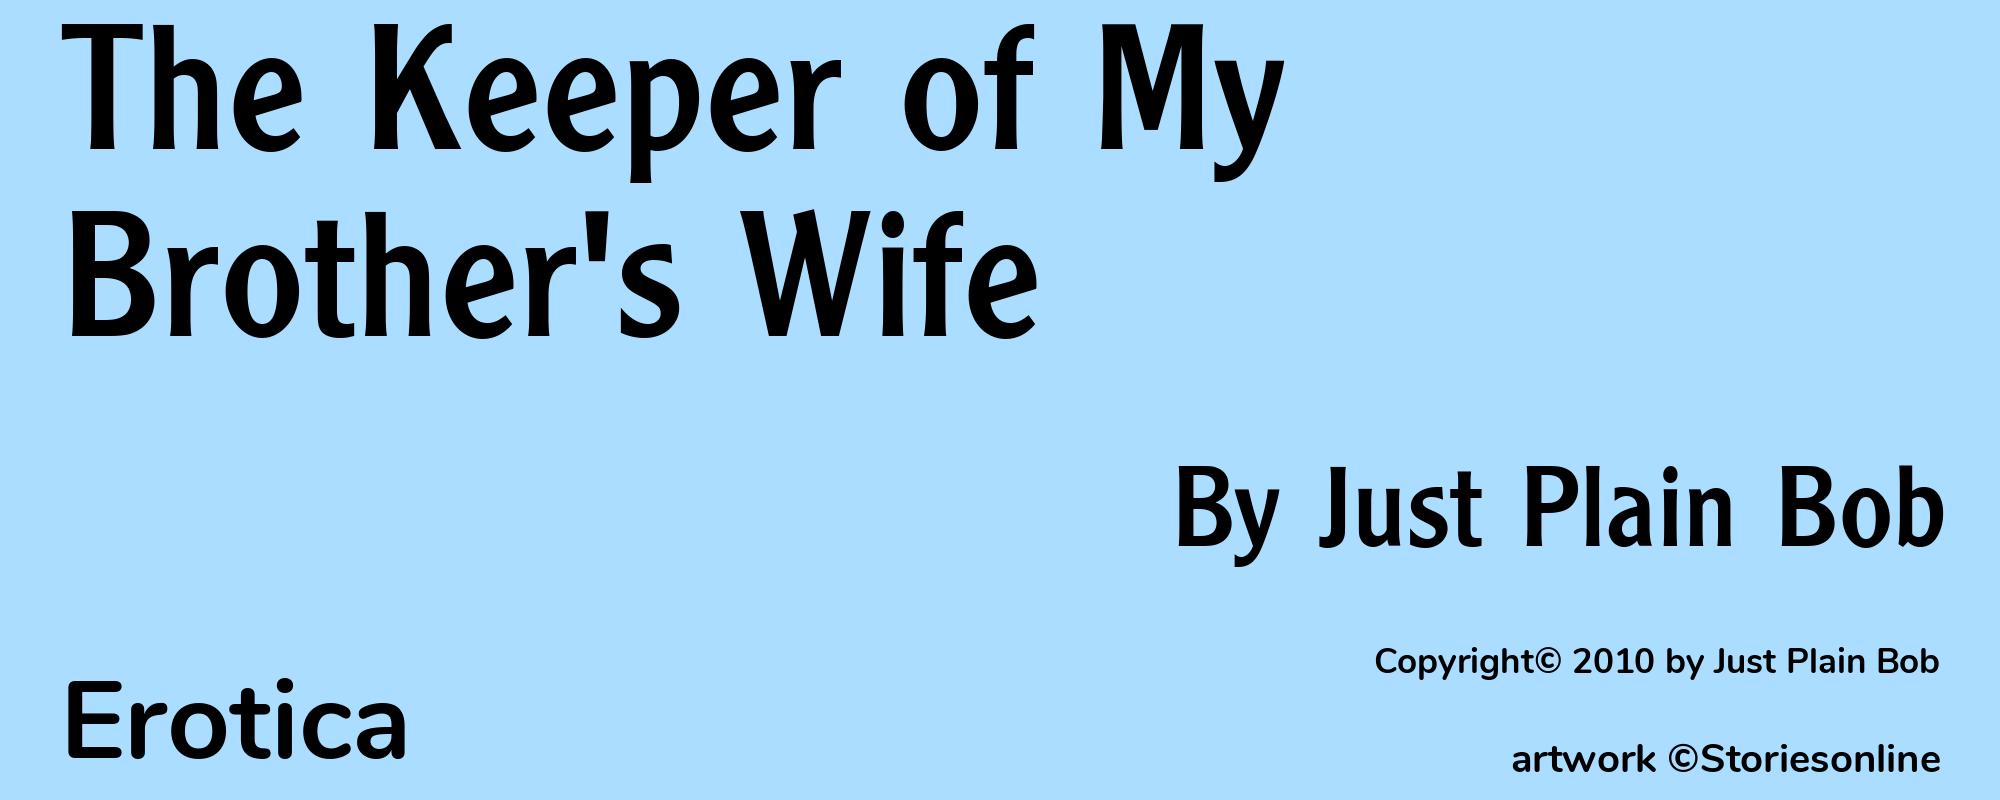 The Keeper of My Brother's Wife - Cover